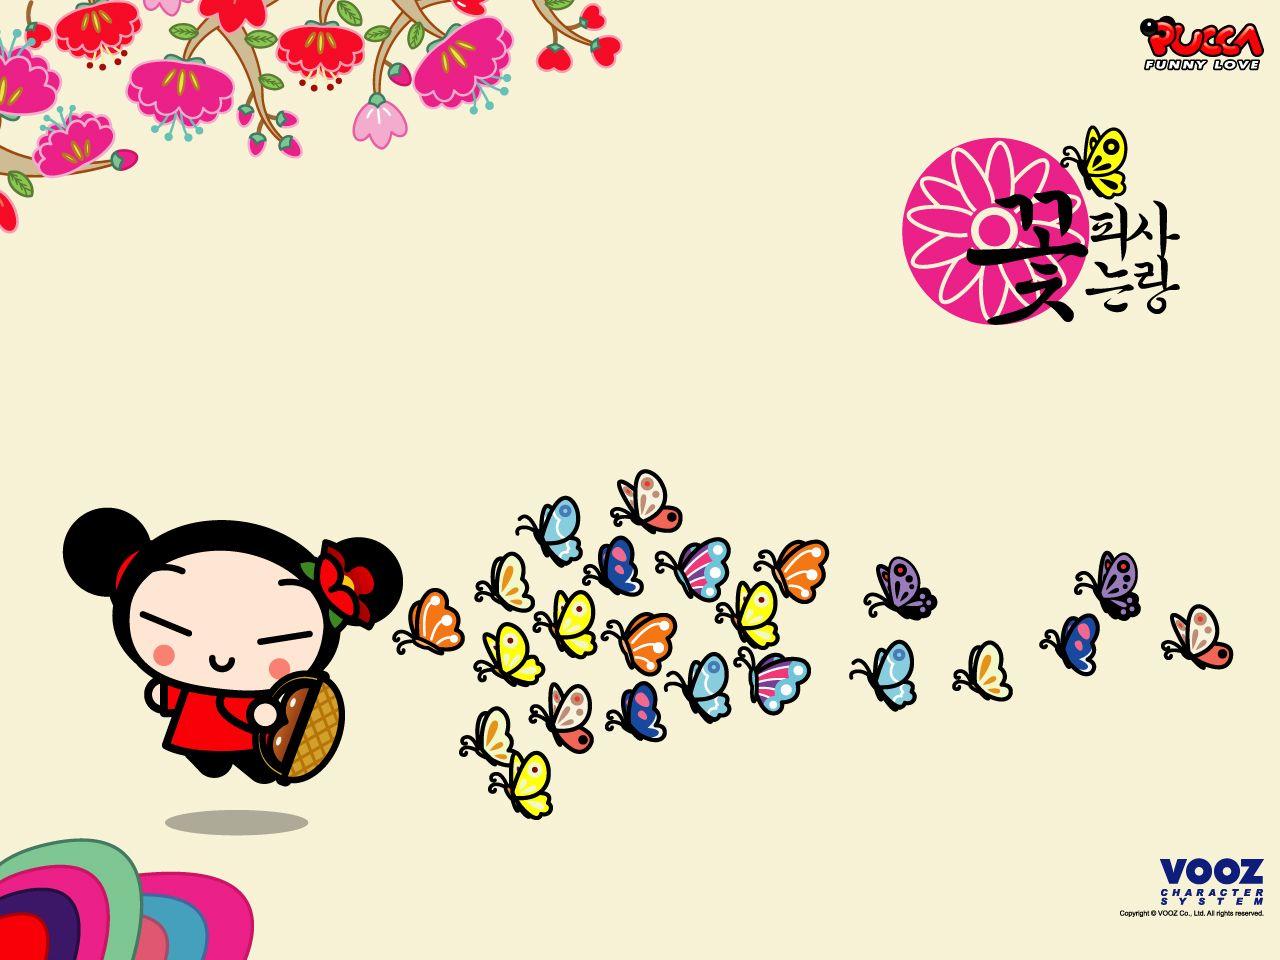 Tracie Byrd: pucca wallpaper hd